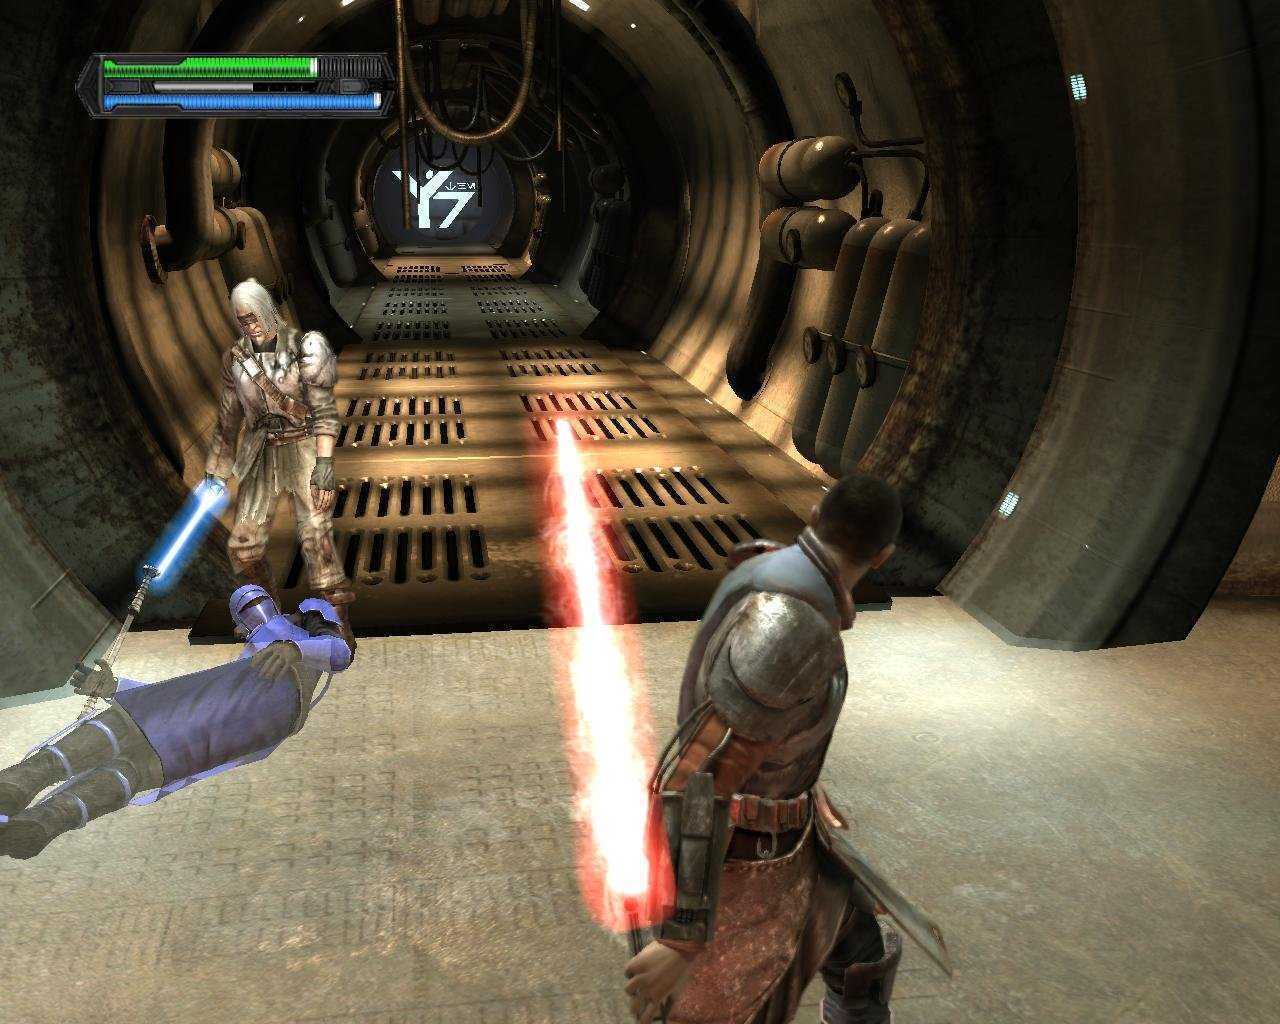 Star wars игры на русском. Star Wars the Force unleashed Ultimate Sith Edition (2009). Стар ВАРС the Force unleashed 1. Игра Star Wars: the Force unleashed II. Star Wars: the Force unleashed - Ultimate Sith Edition.